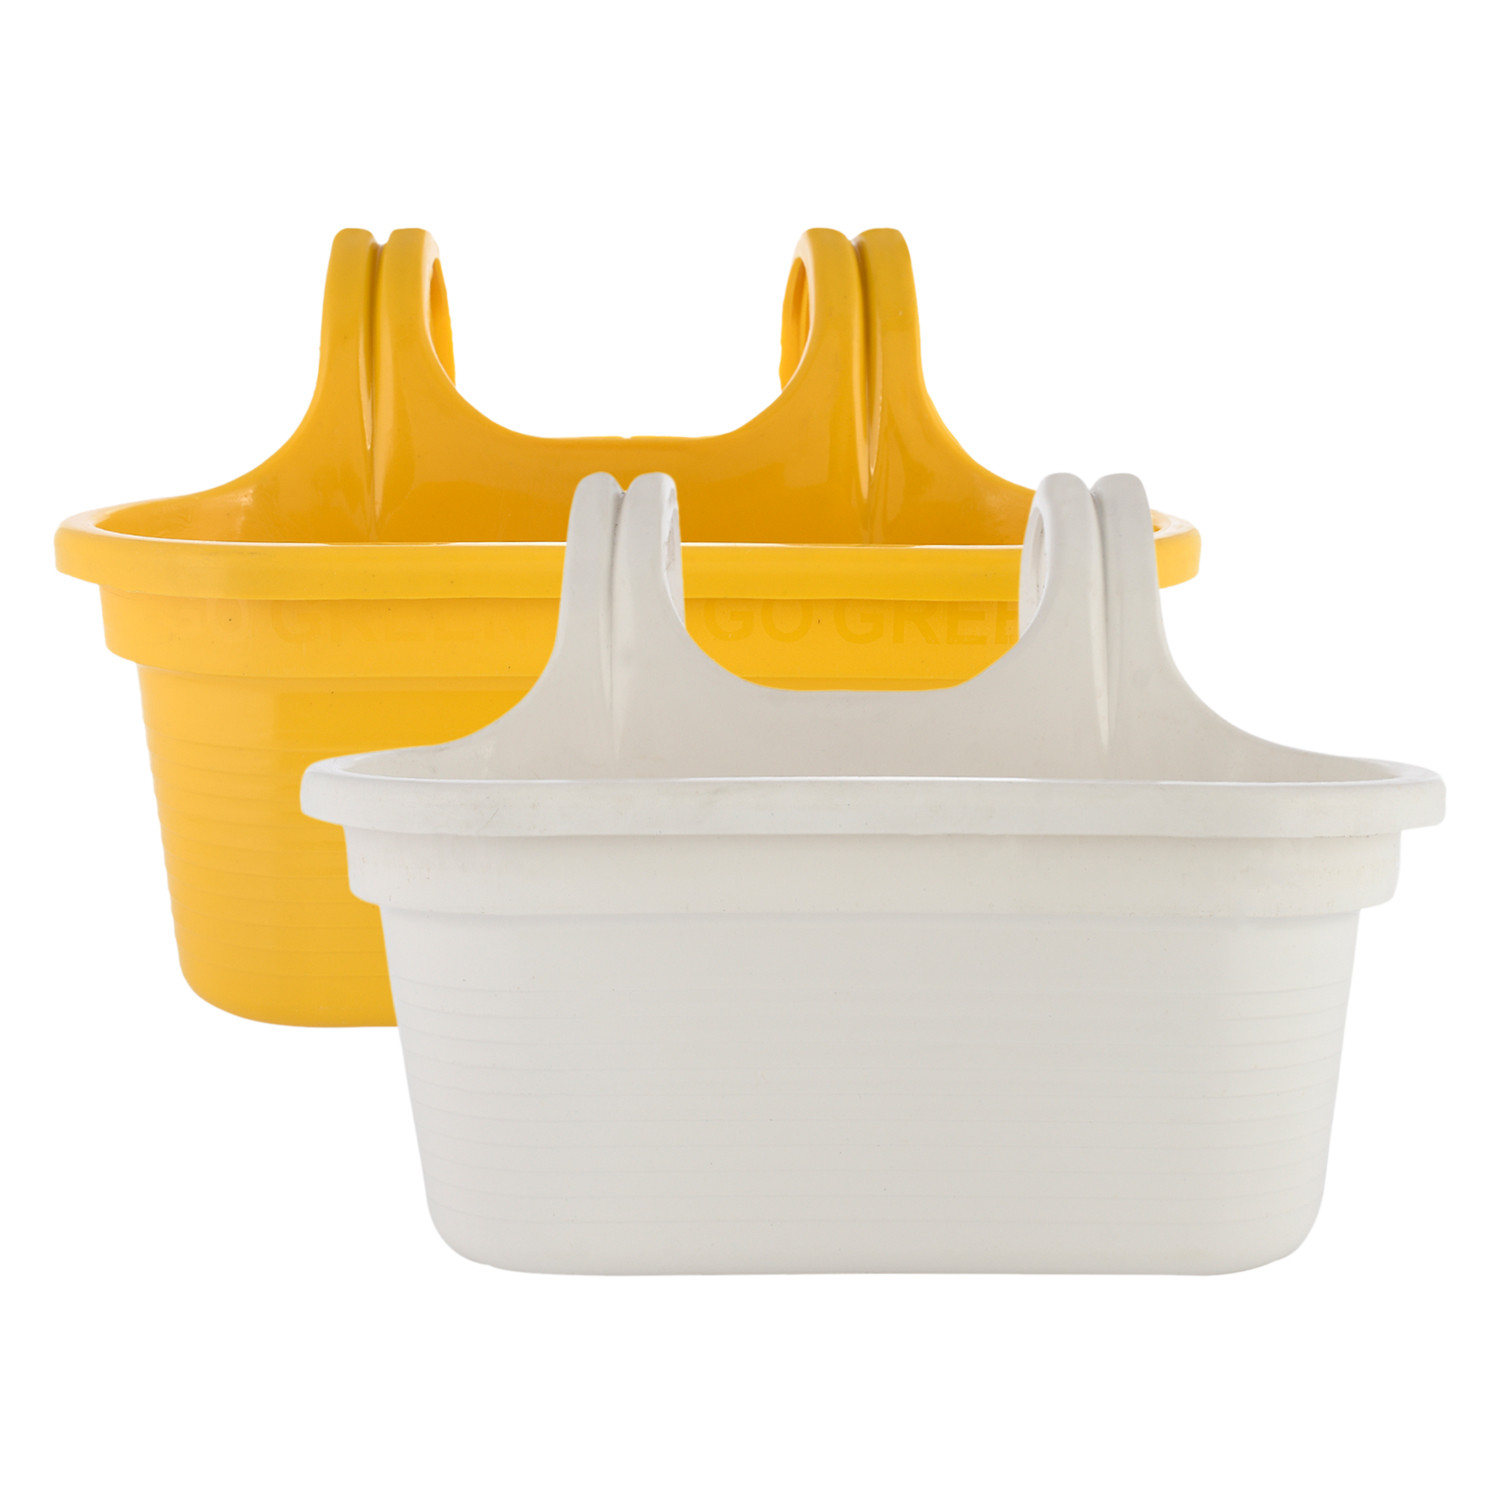 Kuber Industries Hanging Flower Pot|Double Hook Plant Container|Durable Plastic Glossy Finish Pots for Home|Balcony|Garden|12 Inch|Pack of 2 (White & Yellow)